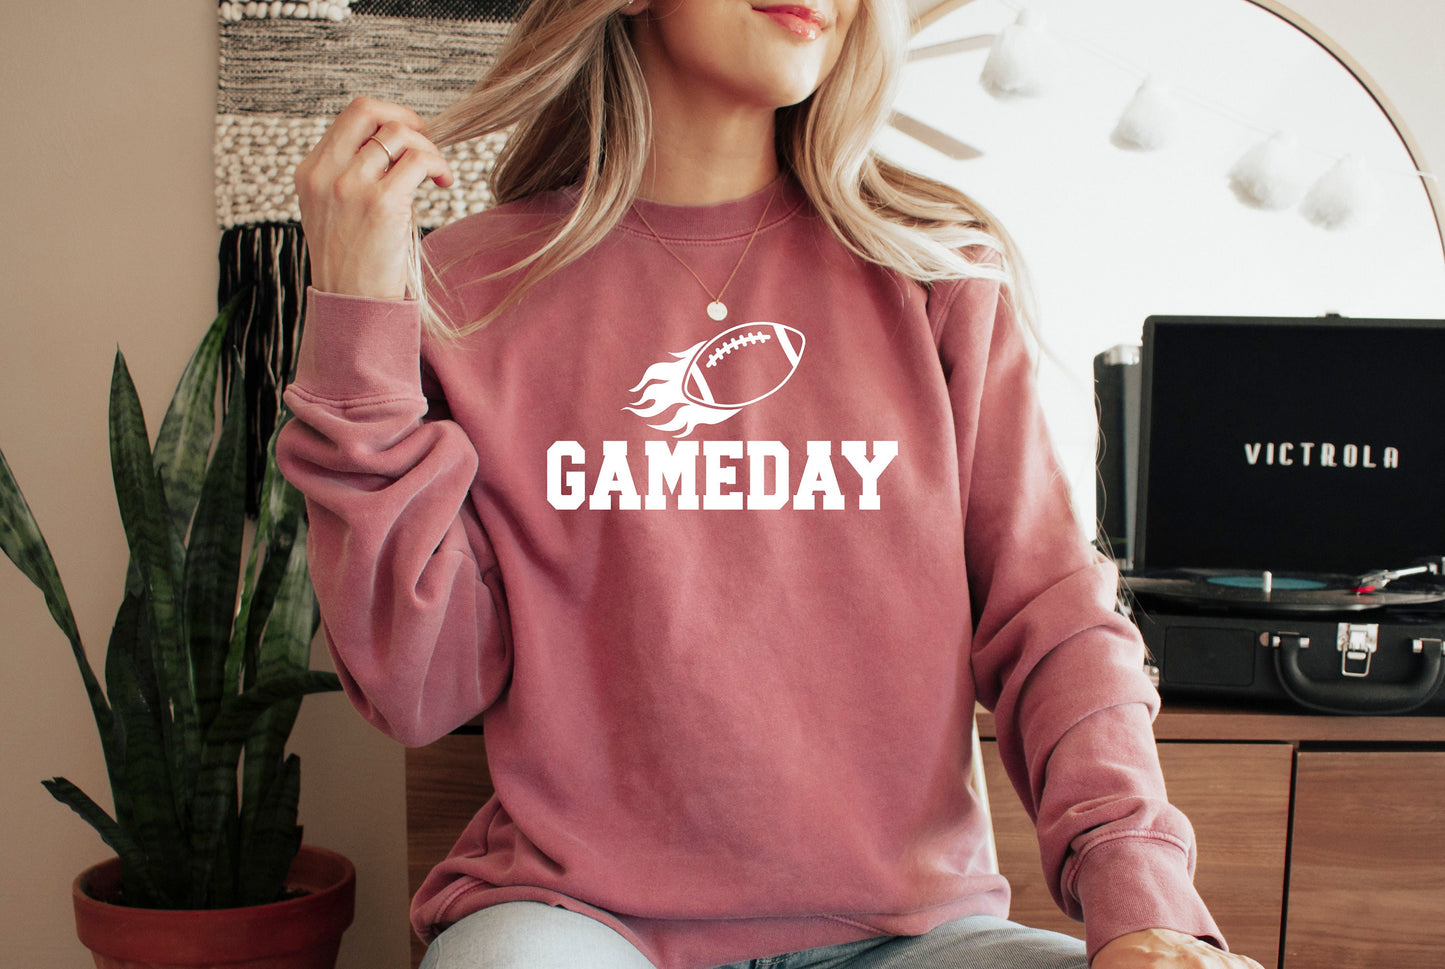 Football Gameday Comfort Colors Sweatshirt Vintage Style Football Shirt Tailgate Clothes Varsity Tee Fire Style